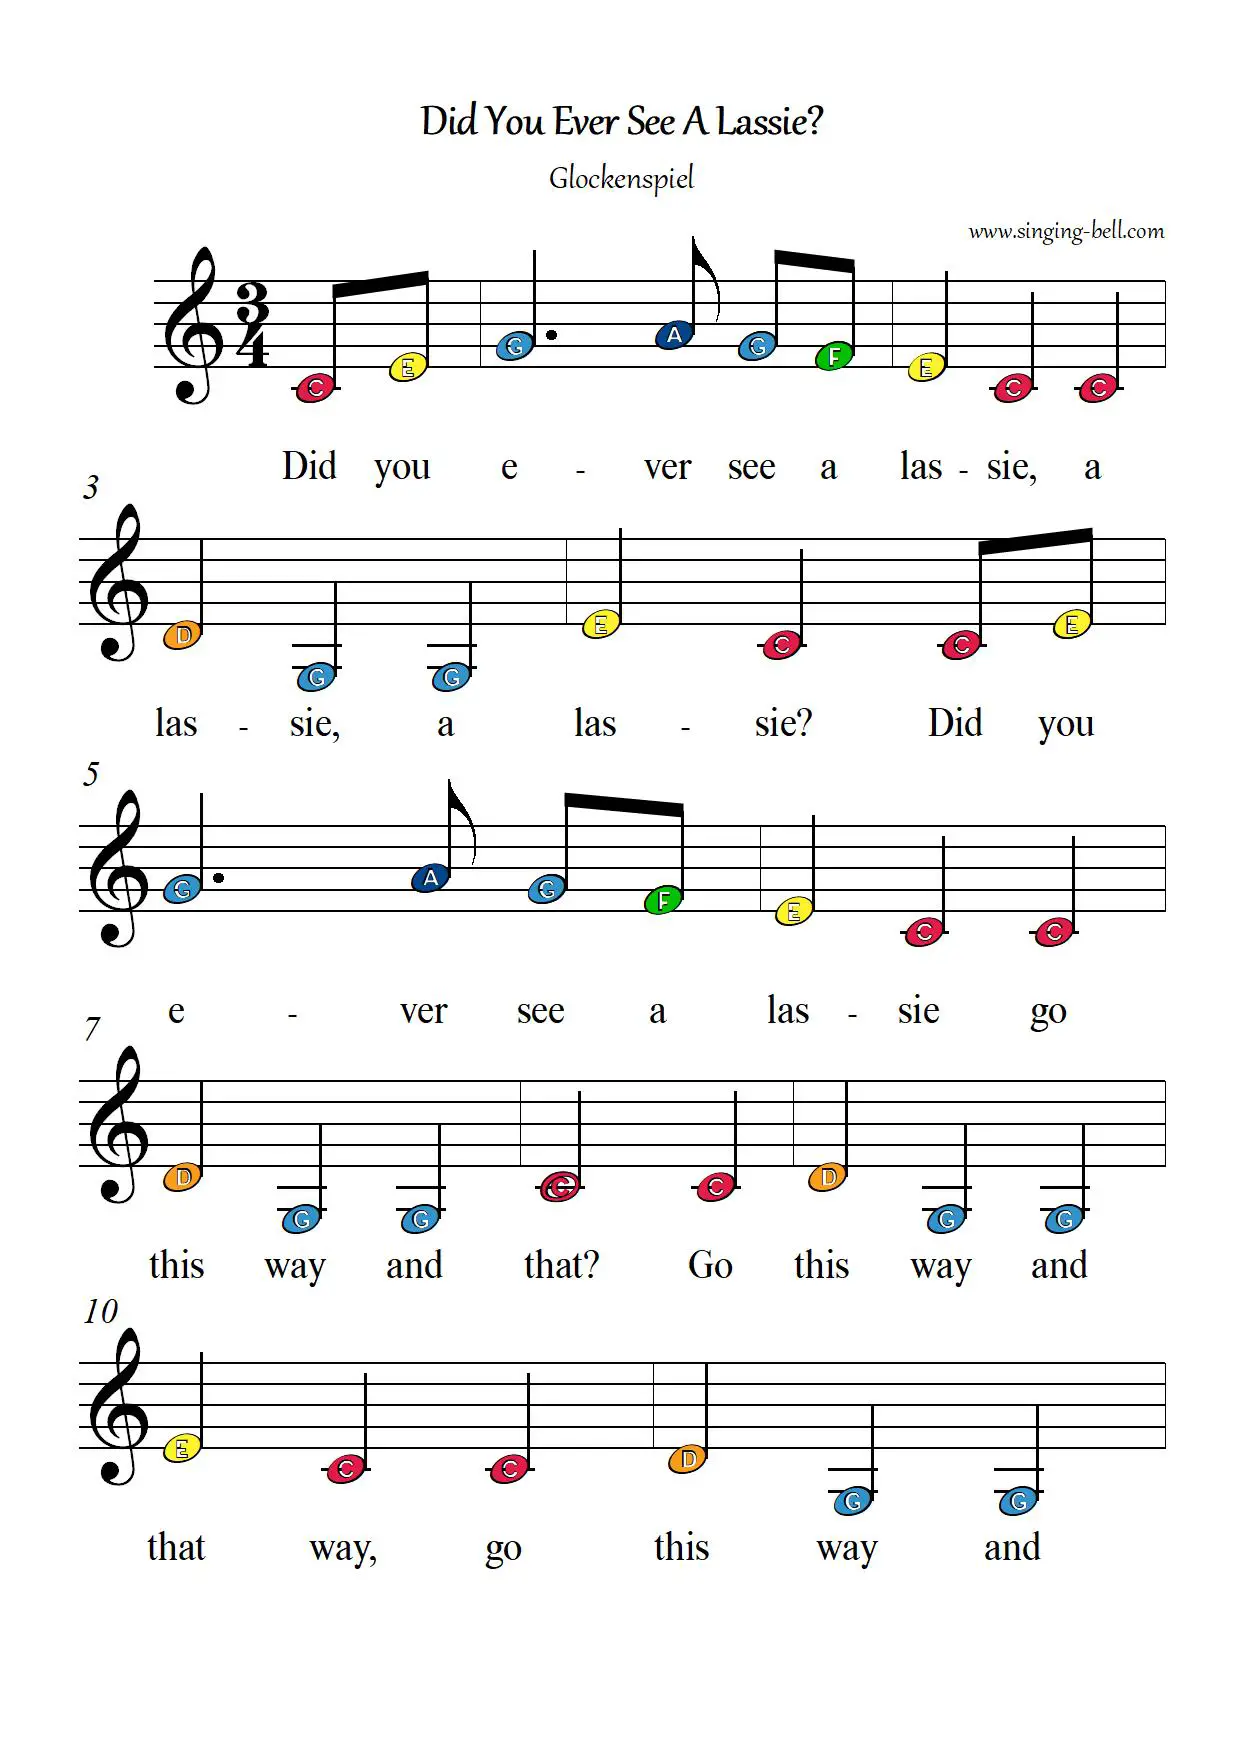 Did you ever see a lassie free xylophone glockenspiel sheet music color notes chart pdf page-1